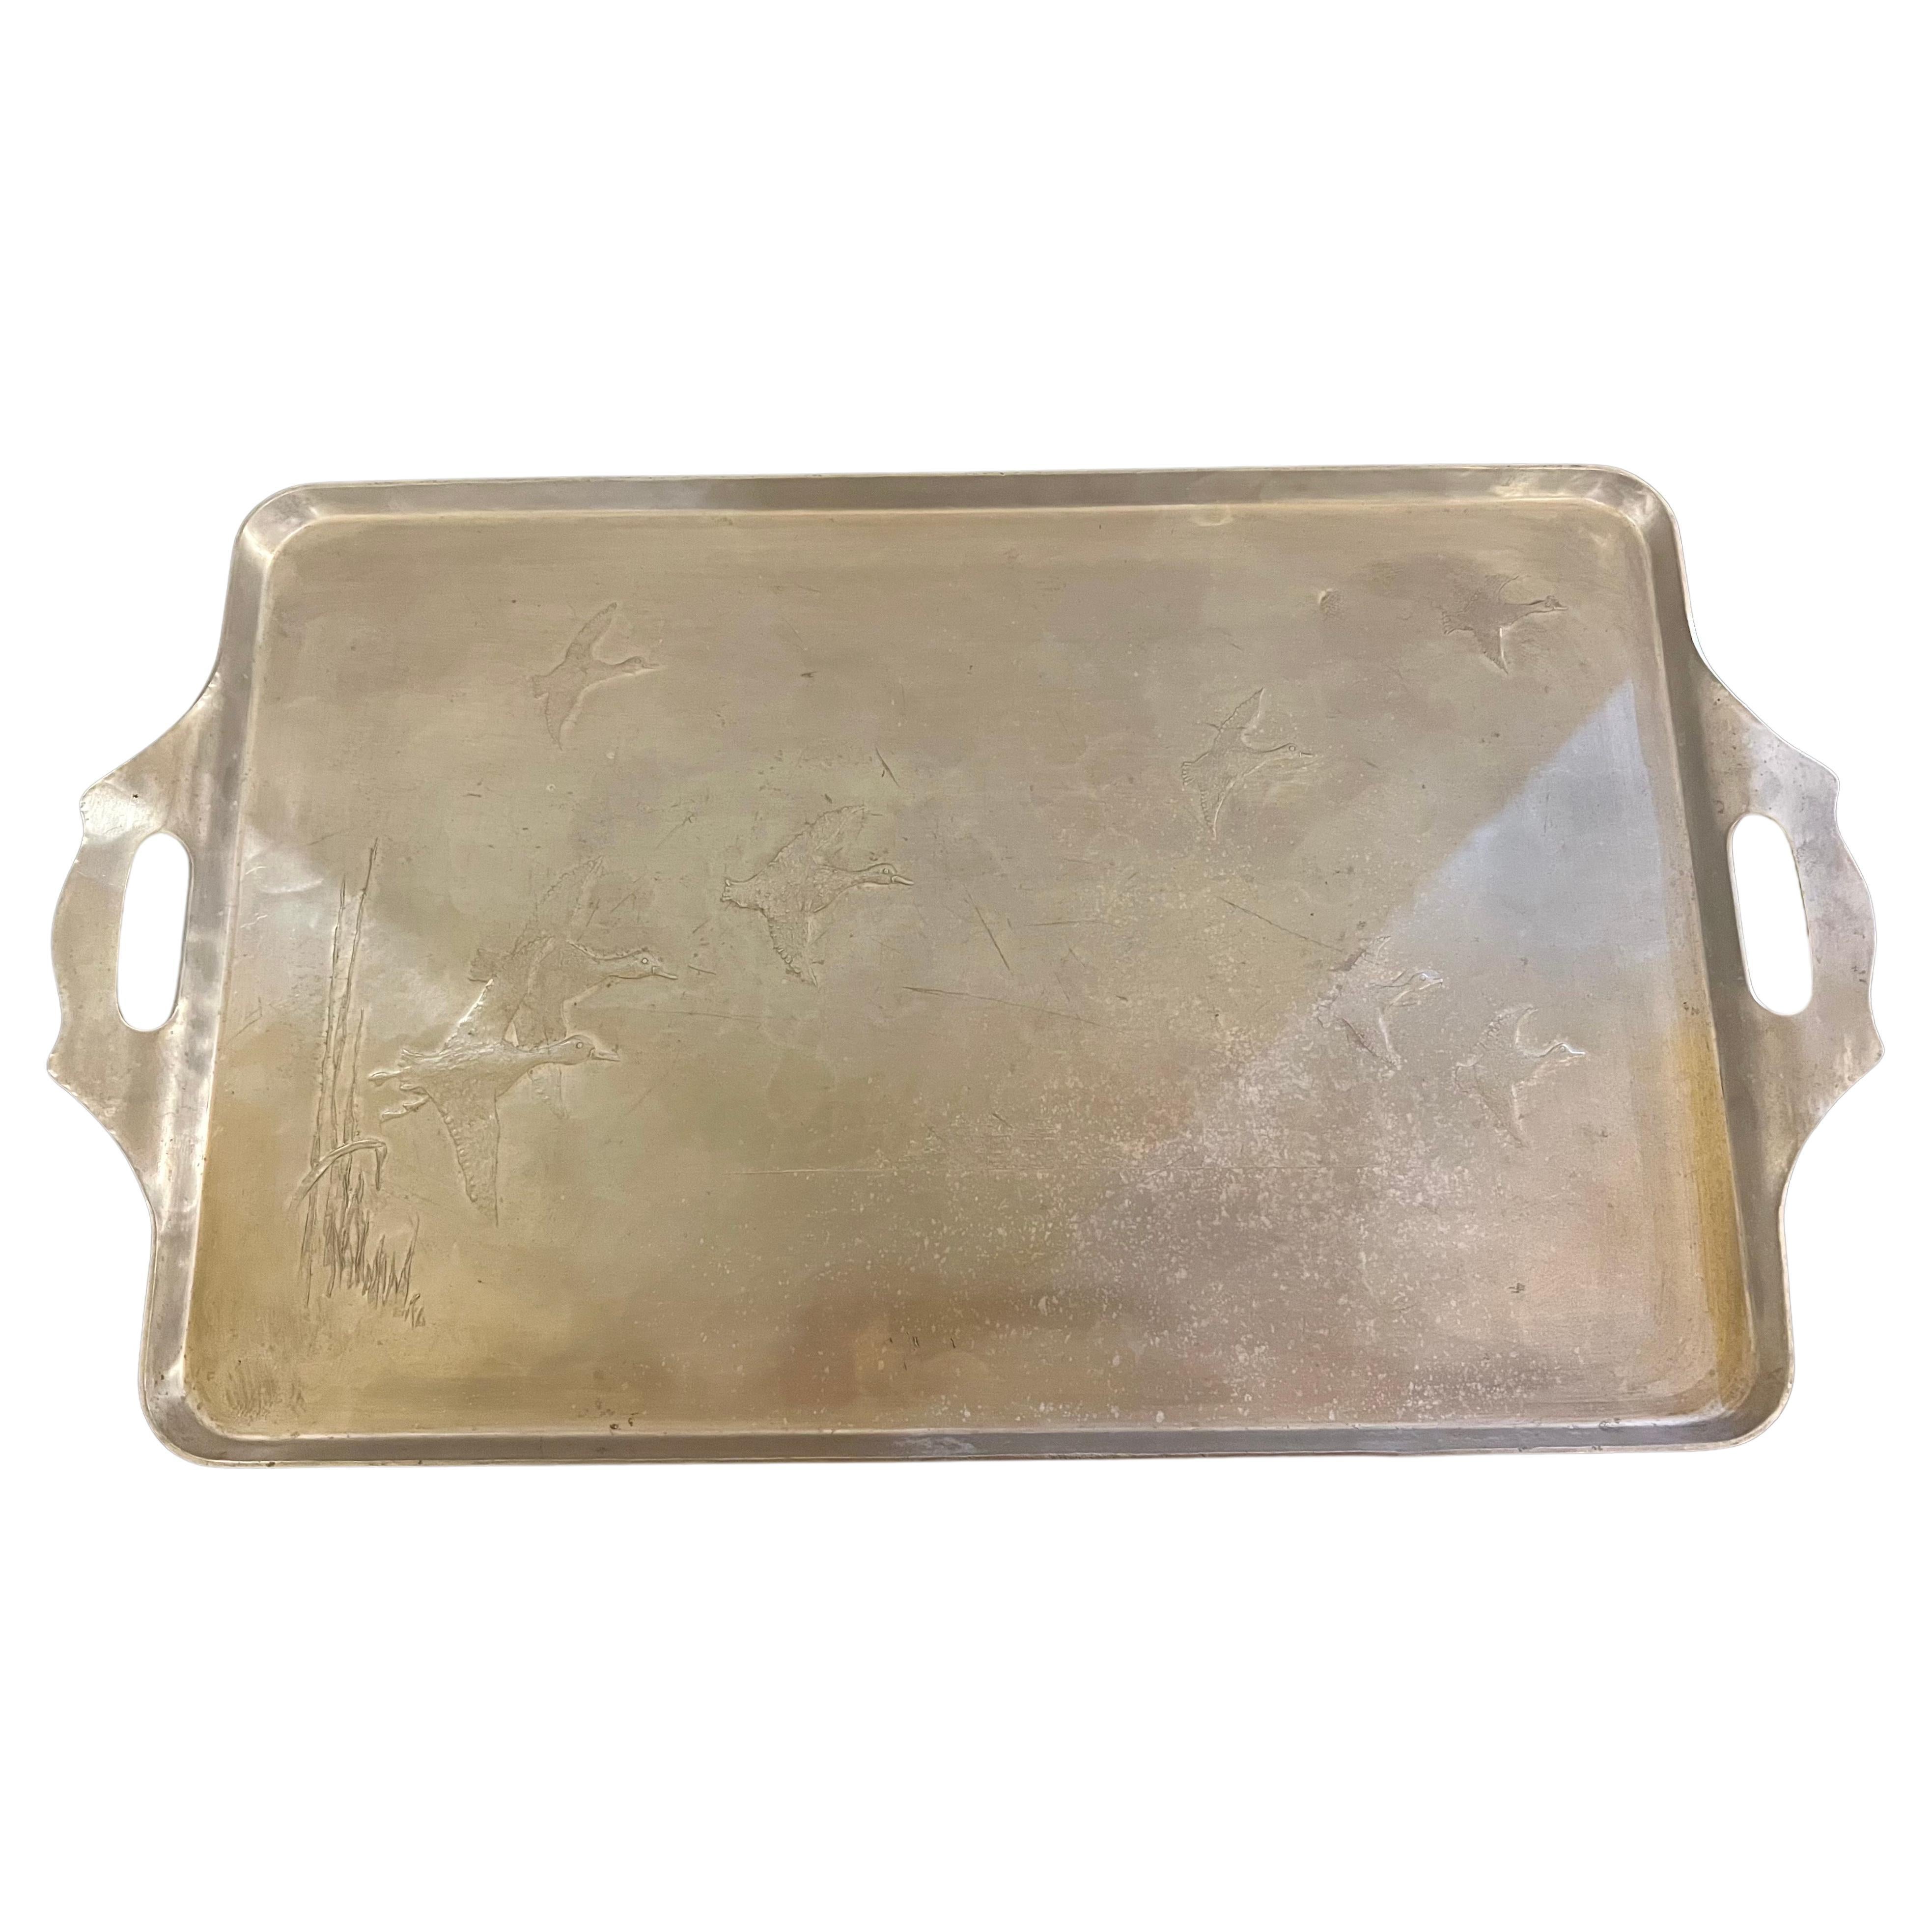 Art Deco 1940s Wendell August Forge Aluminium Tray with Handles Ducks Engraved For Sale